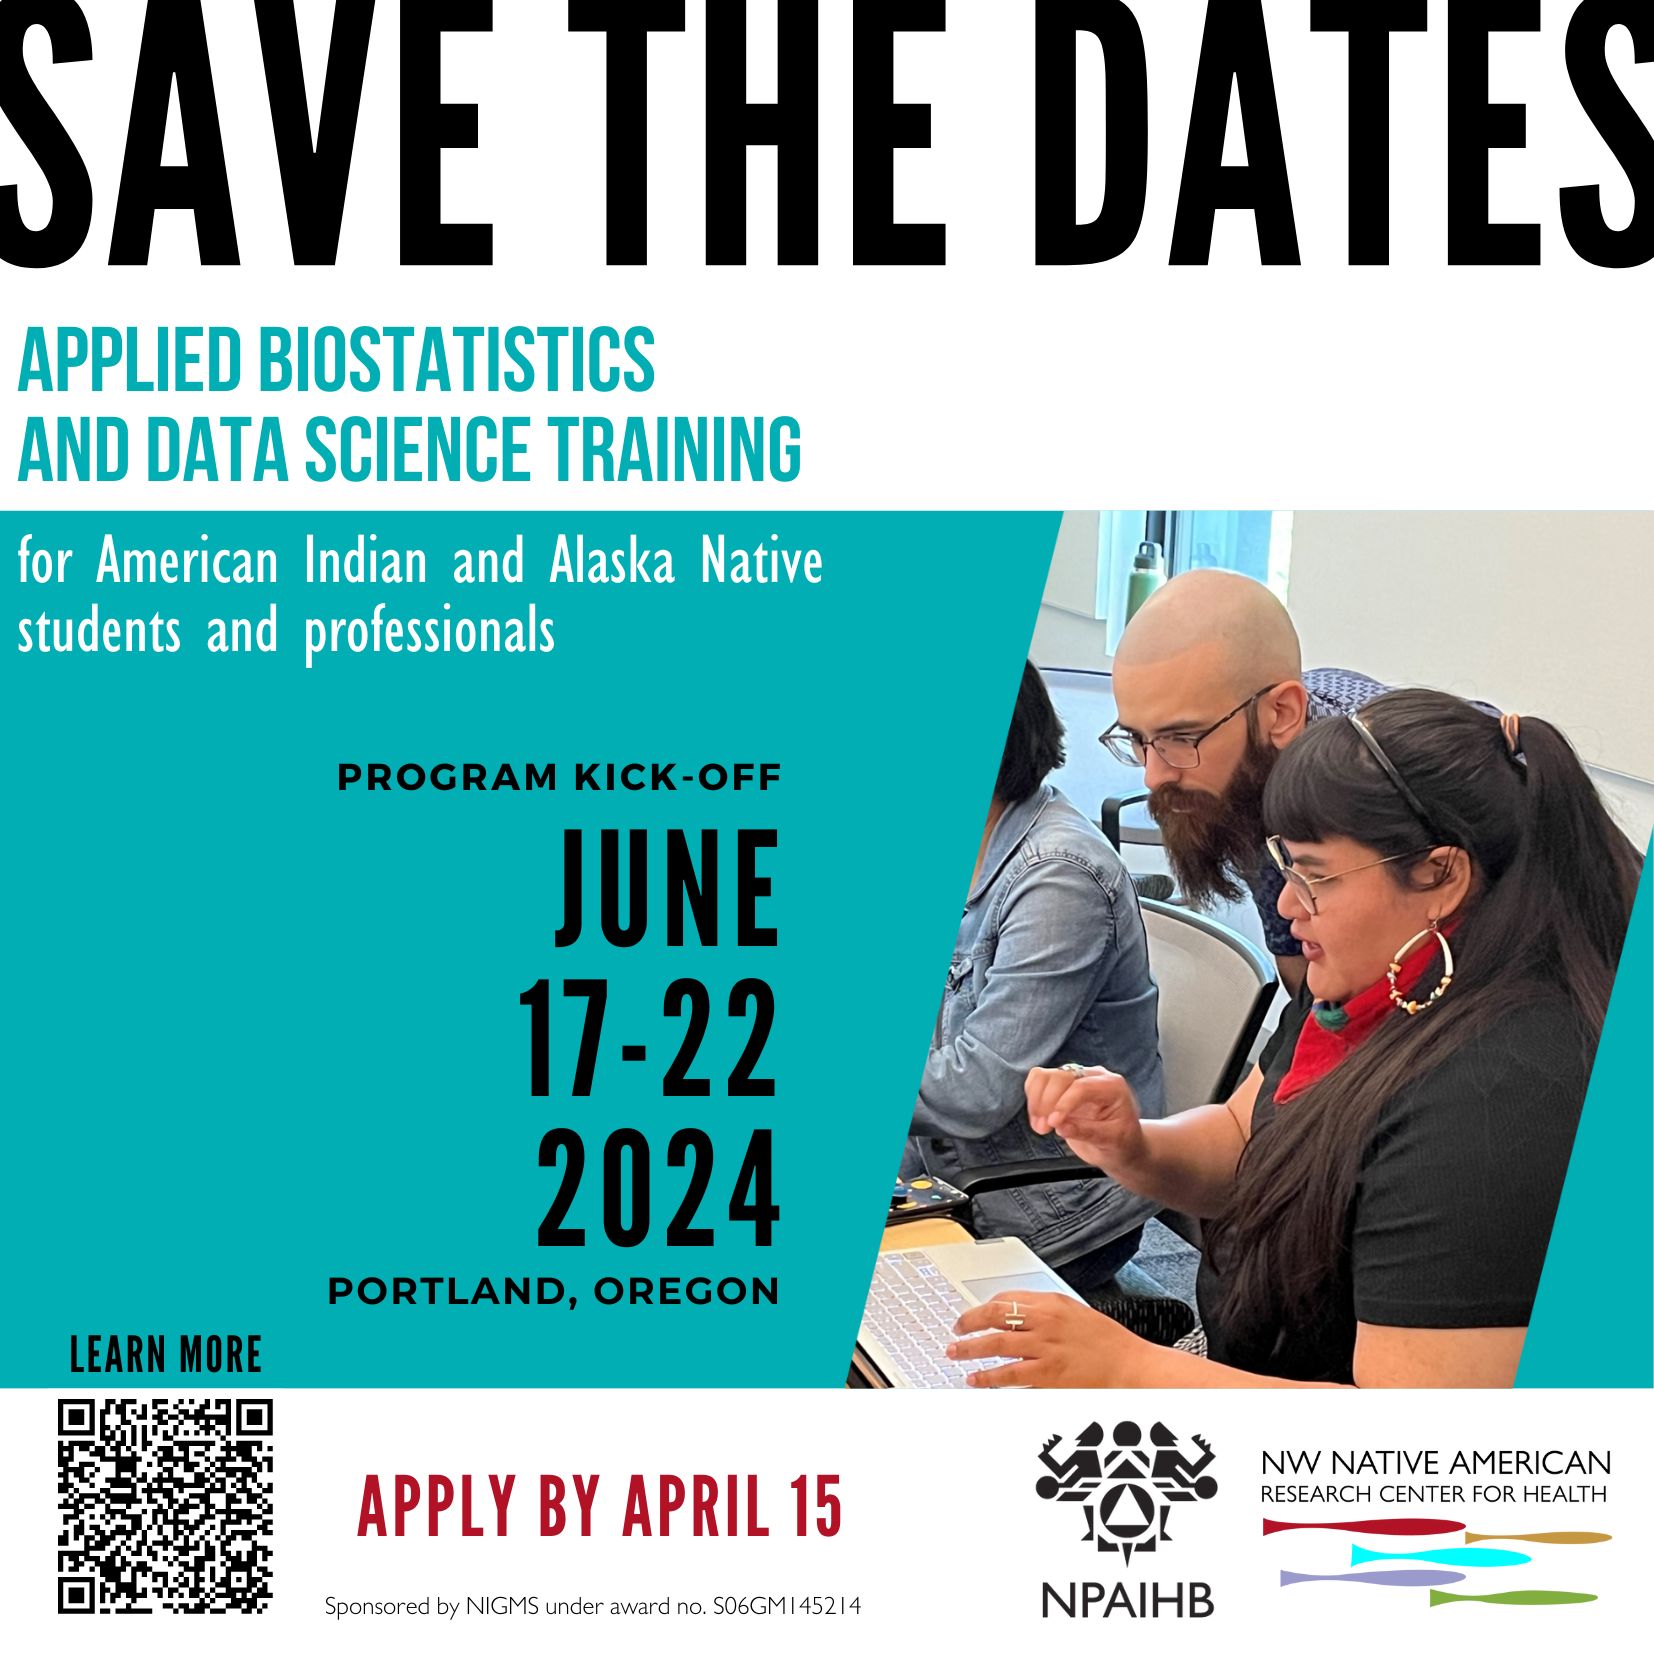 Save the date graphic to apply for the Northwest Native American Research Center for Health Applied Biostatistics and Data Science Training Program by April 15 with a QR code to learn more: www.bit.ly/43nRzDY